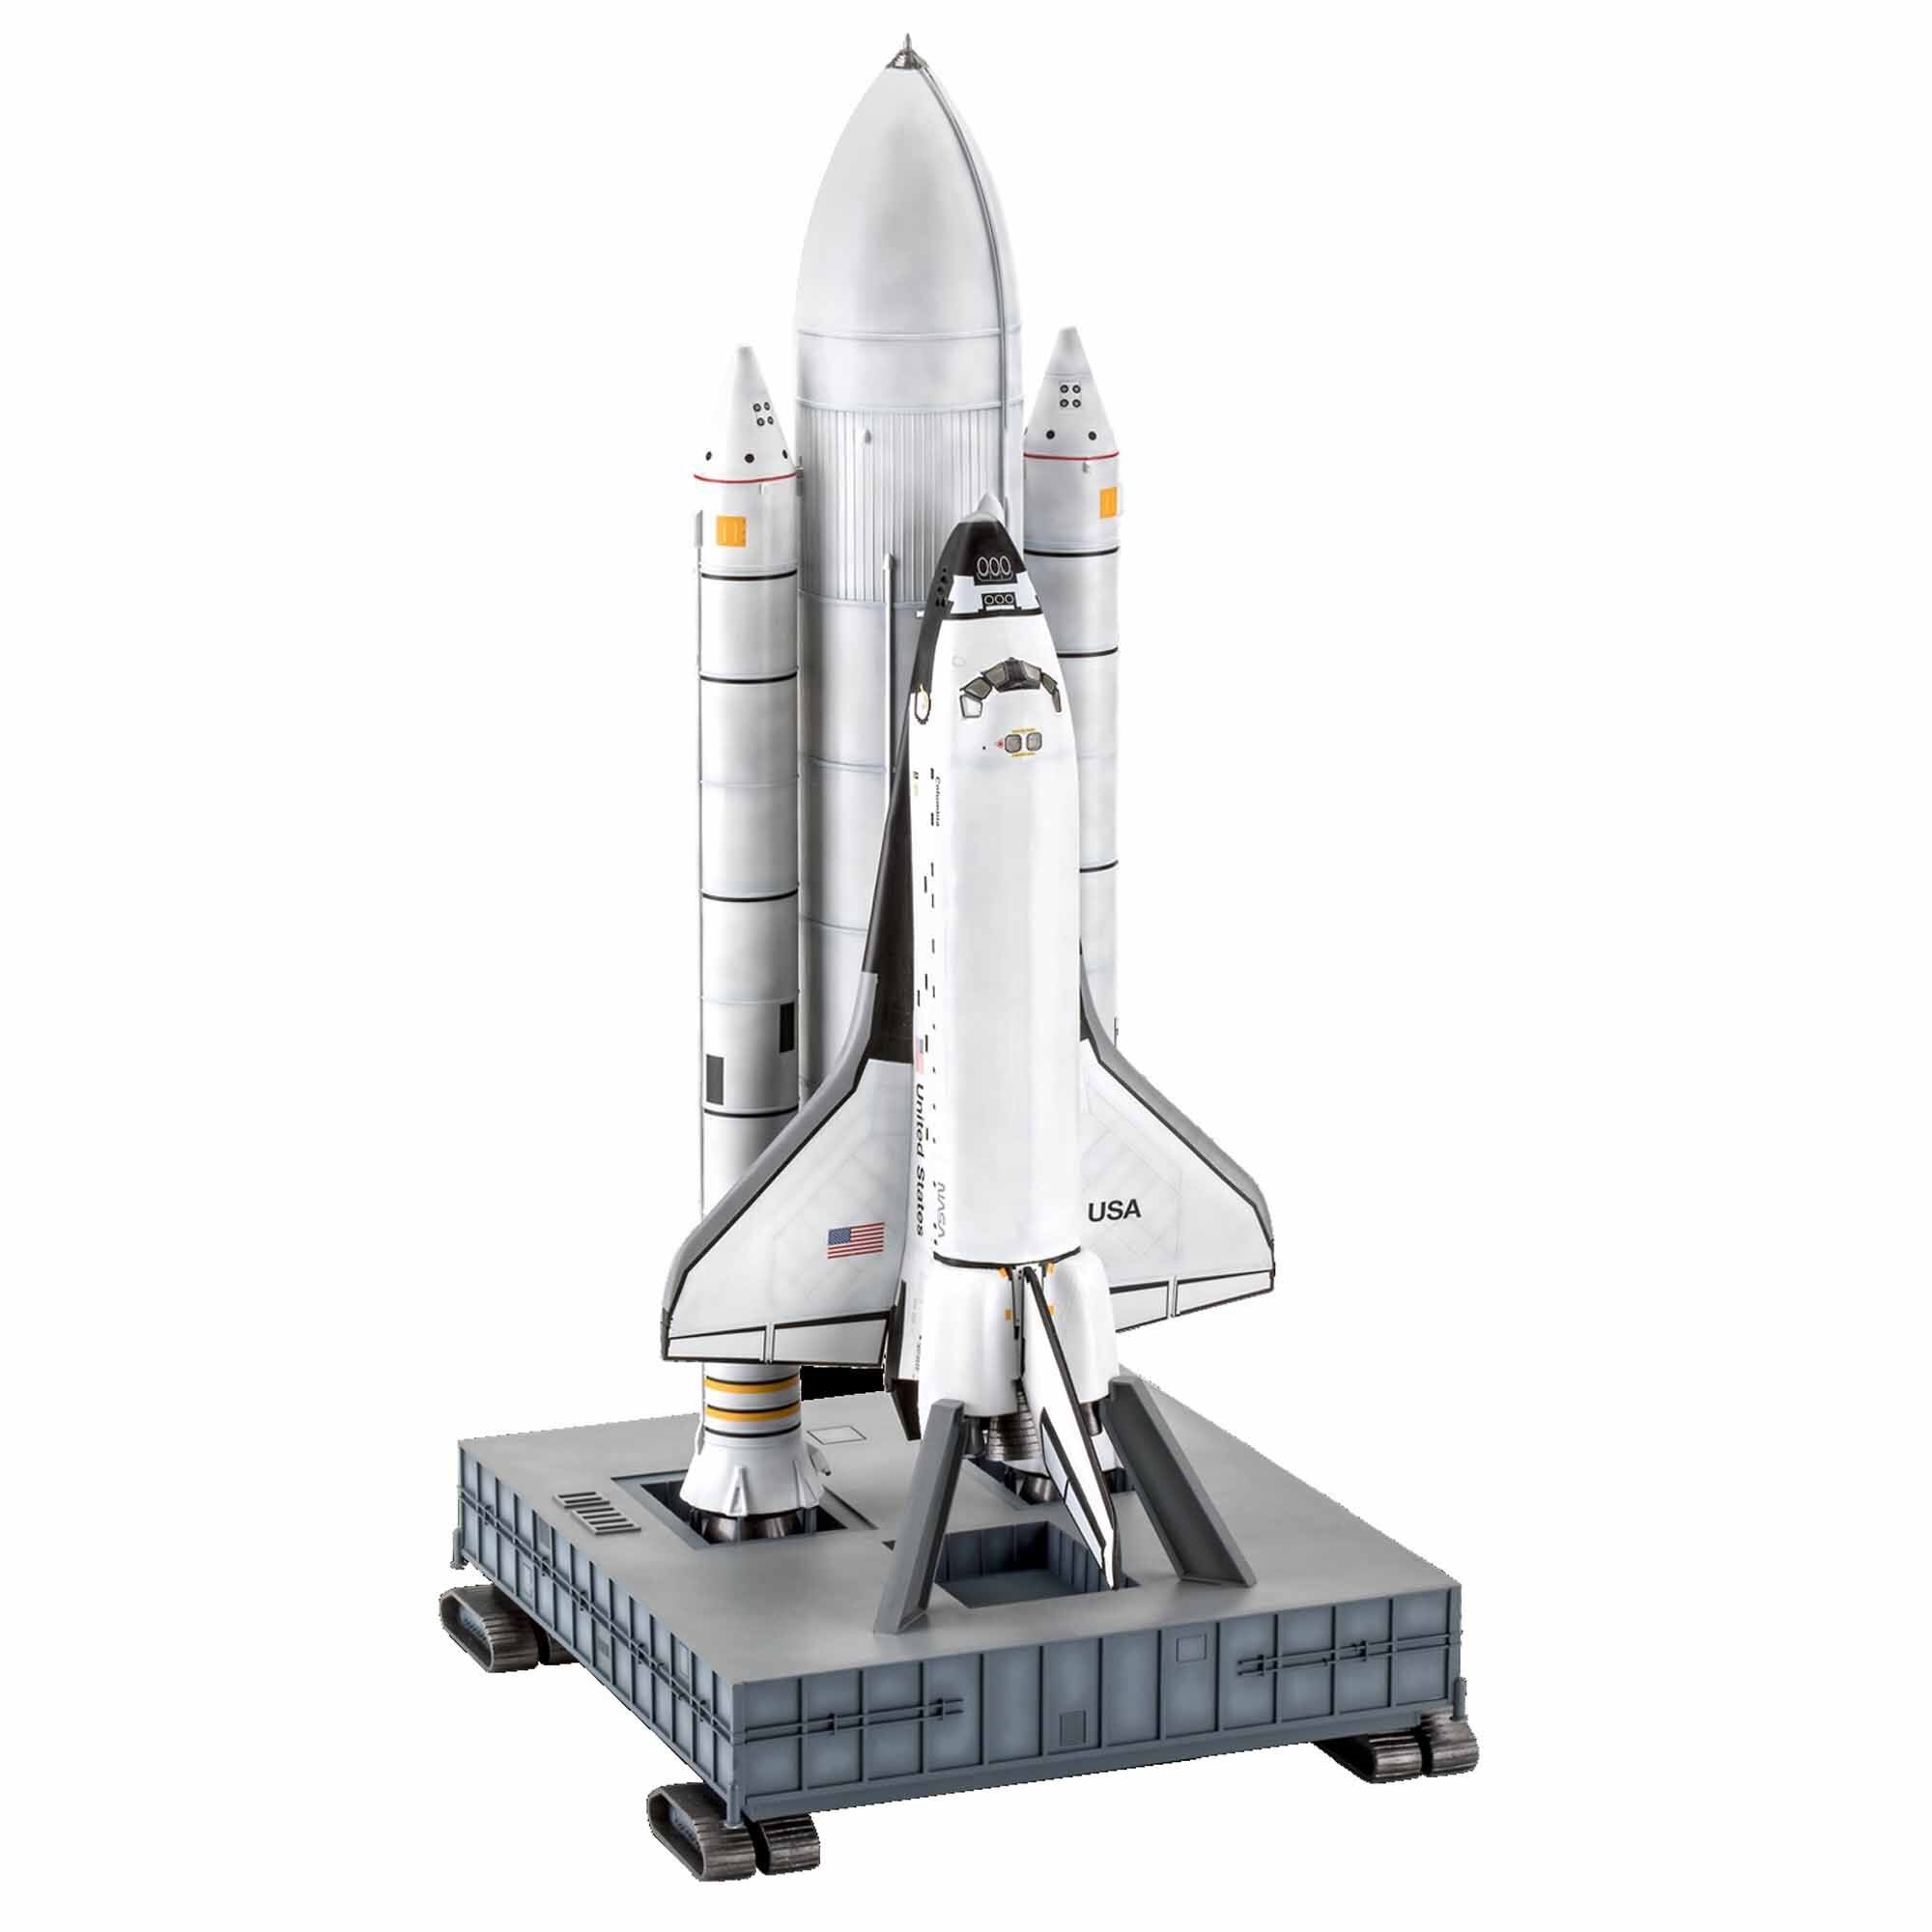 Revell 1/144 40th Anniversary Space Shuttle and Booster Rockets